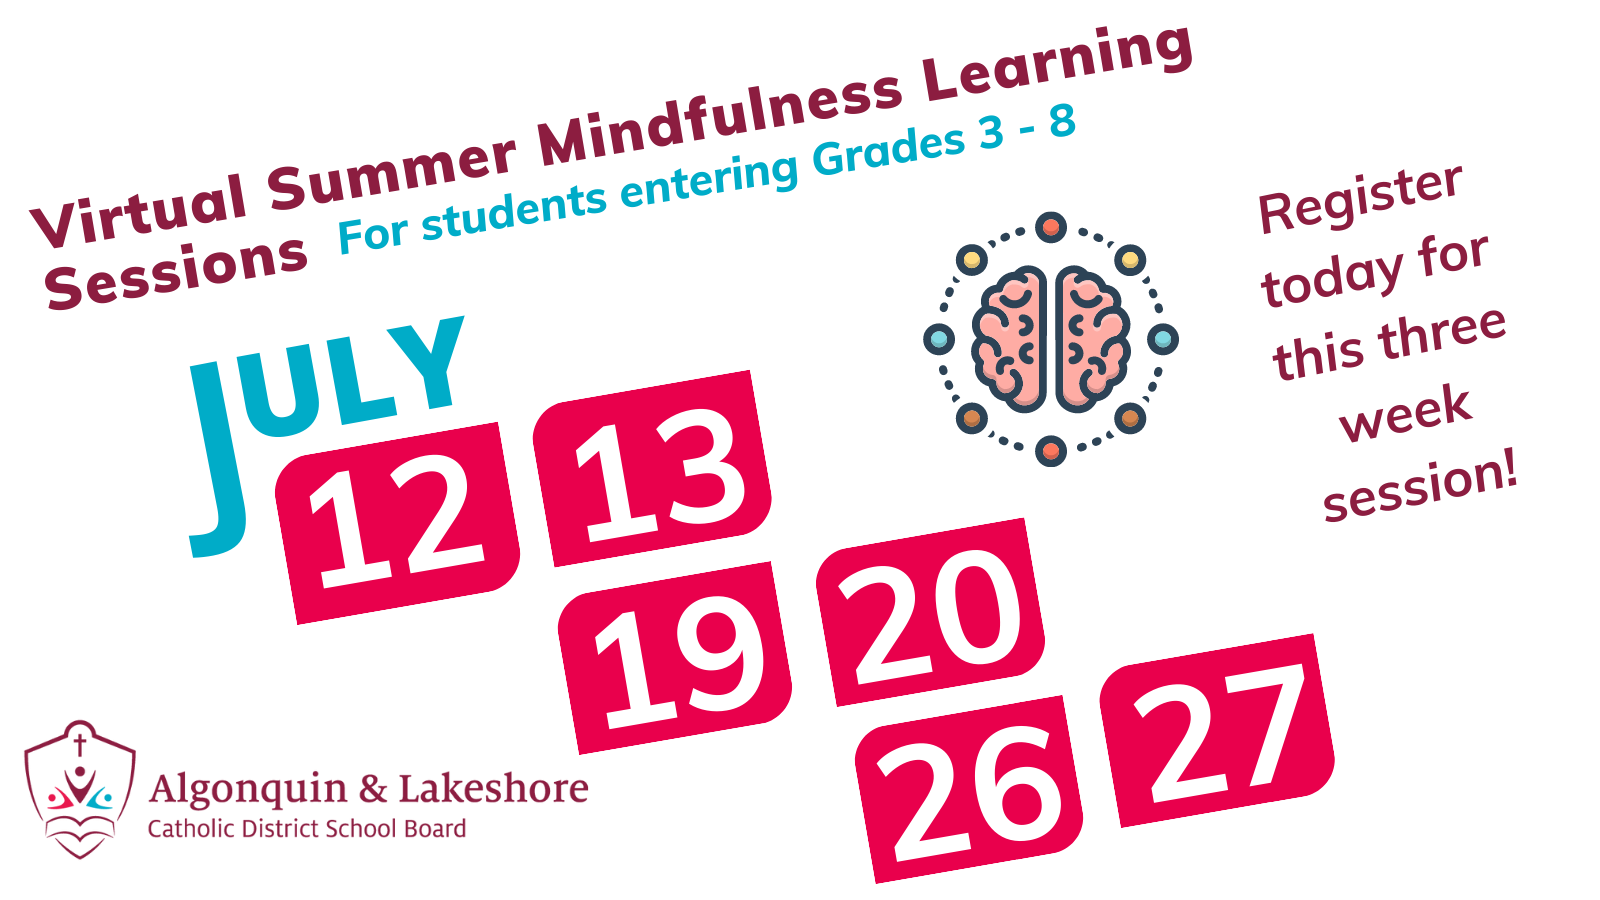 text over image that says "Virtual Summer Mindfulness Learning Sessions for students entering grades 3-8". July 12, 13, 19, 20